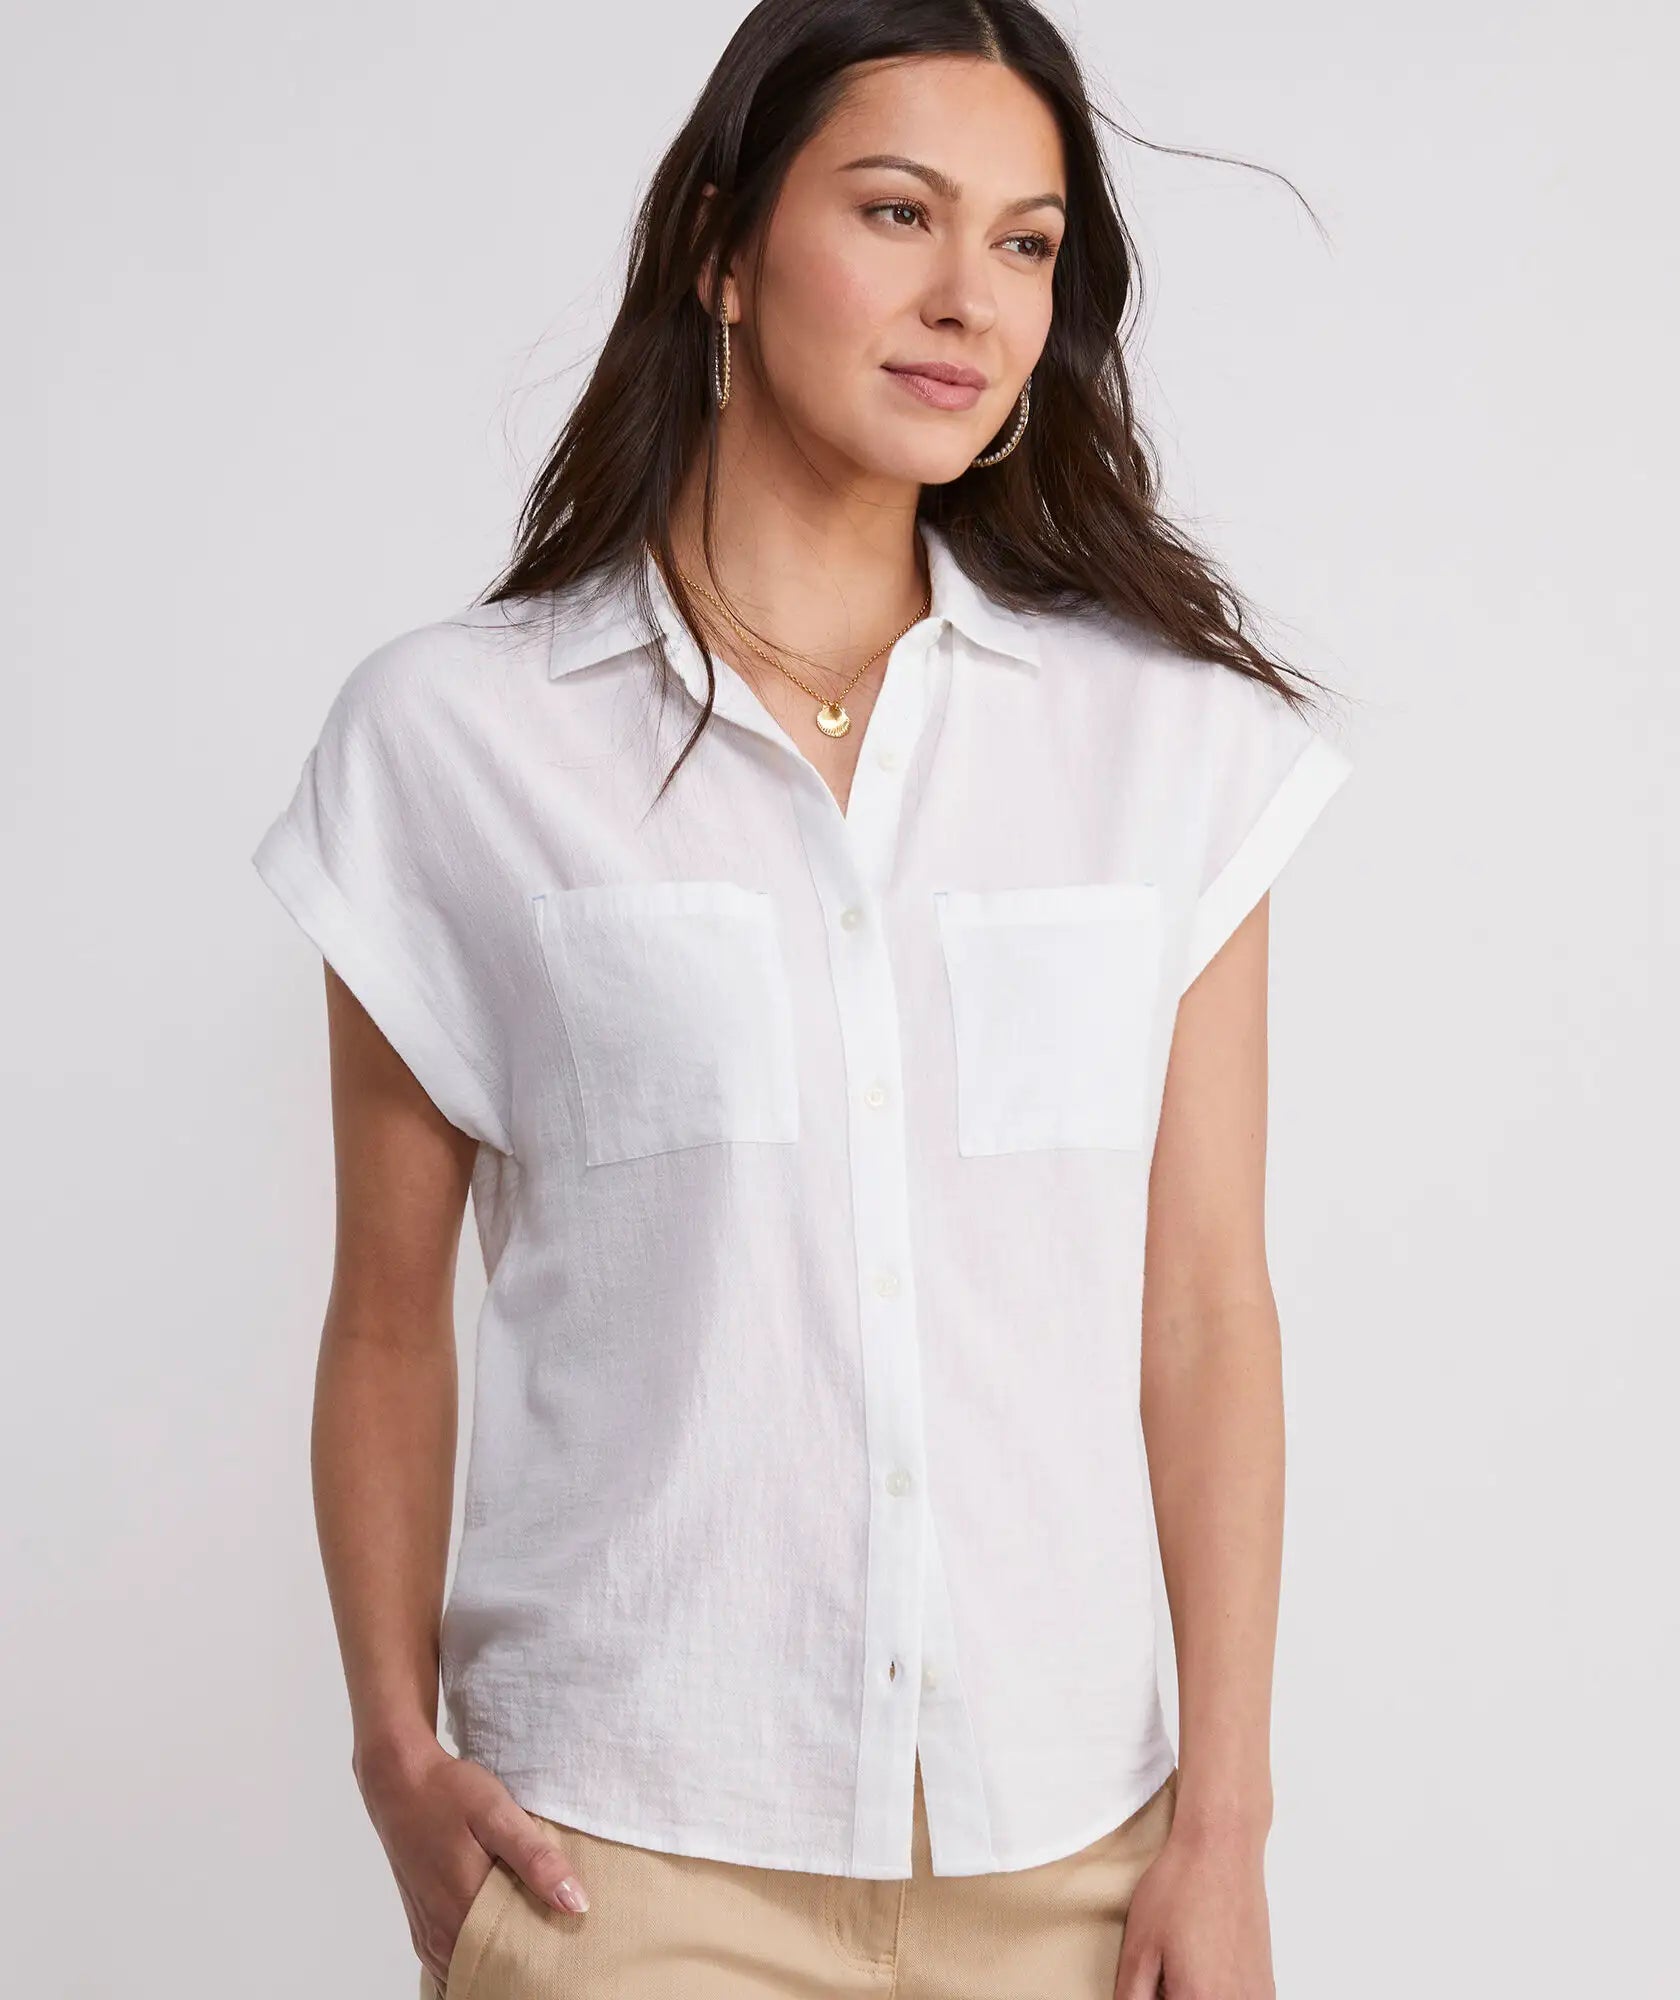 Vineyard Vines women's Lightweight Short Sleeve Button Down shirt in the color white.